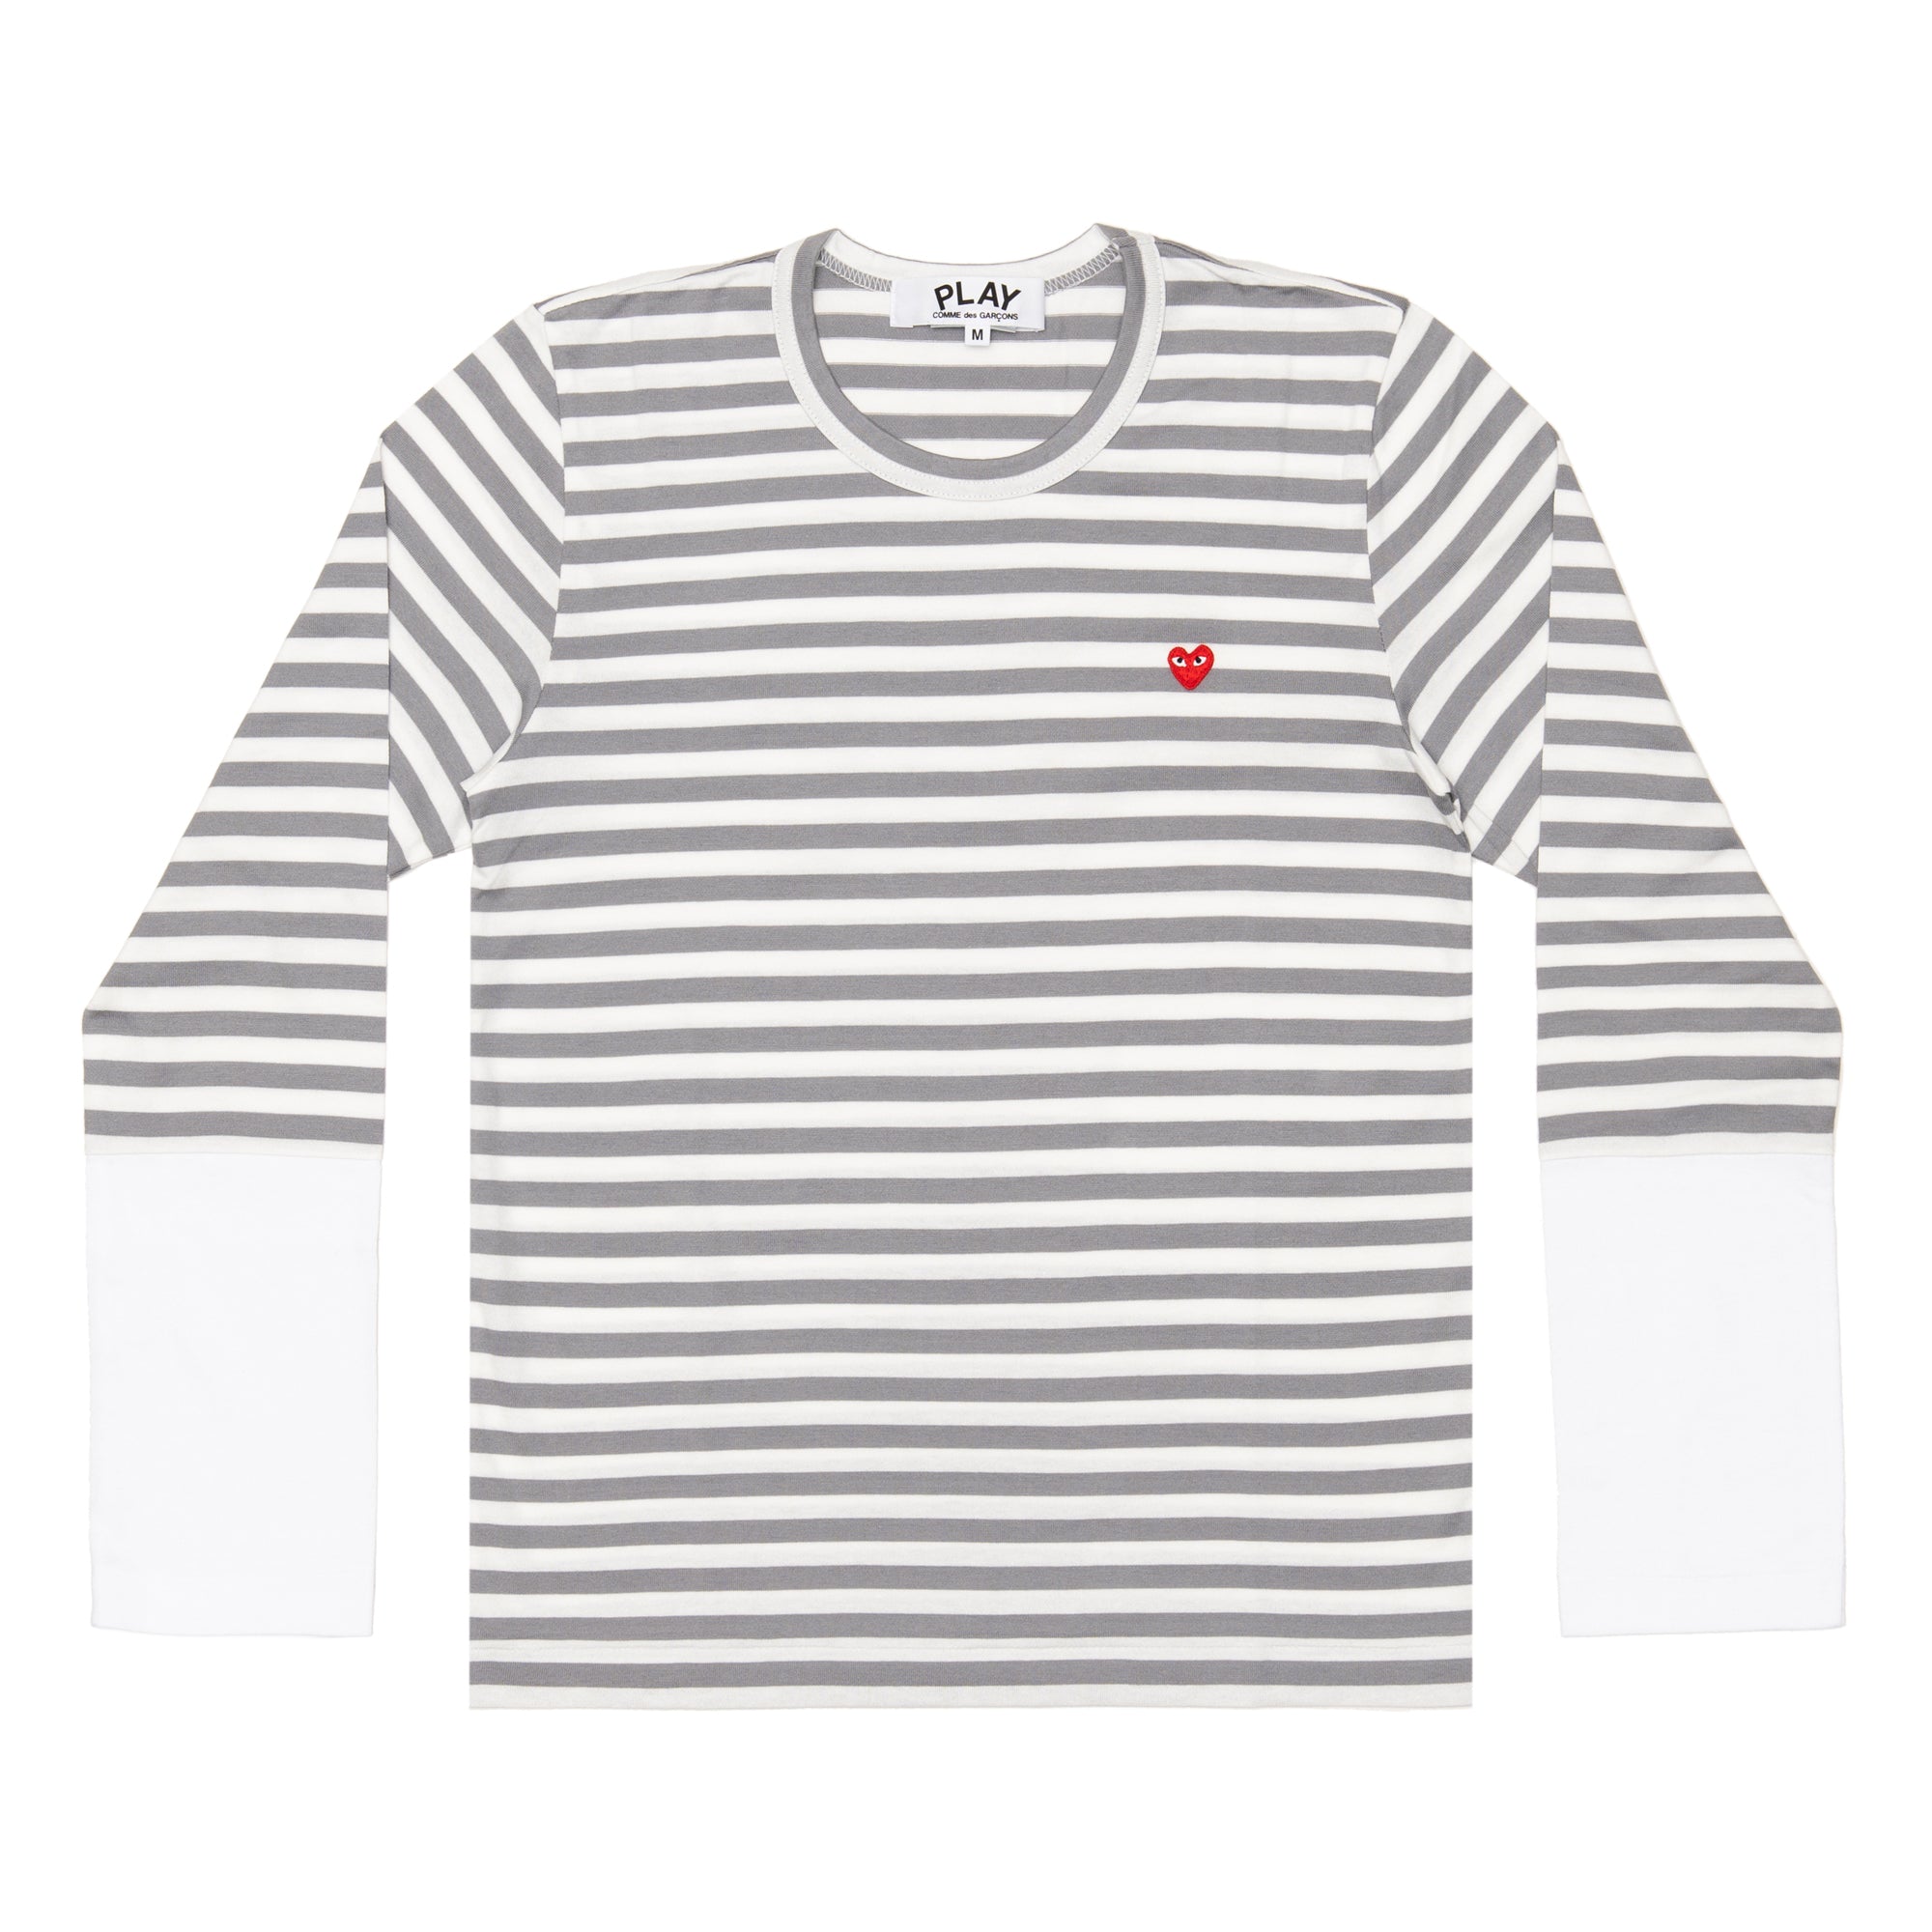 PLAY CDG - Small Red Heart Striped L/S T-Shirt - (Gray X White) view 1